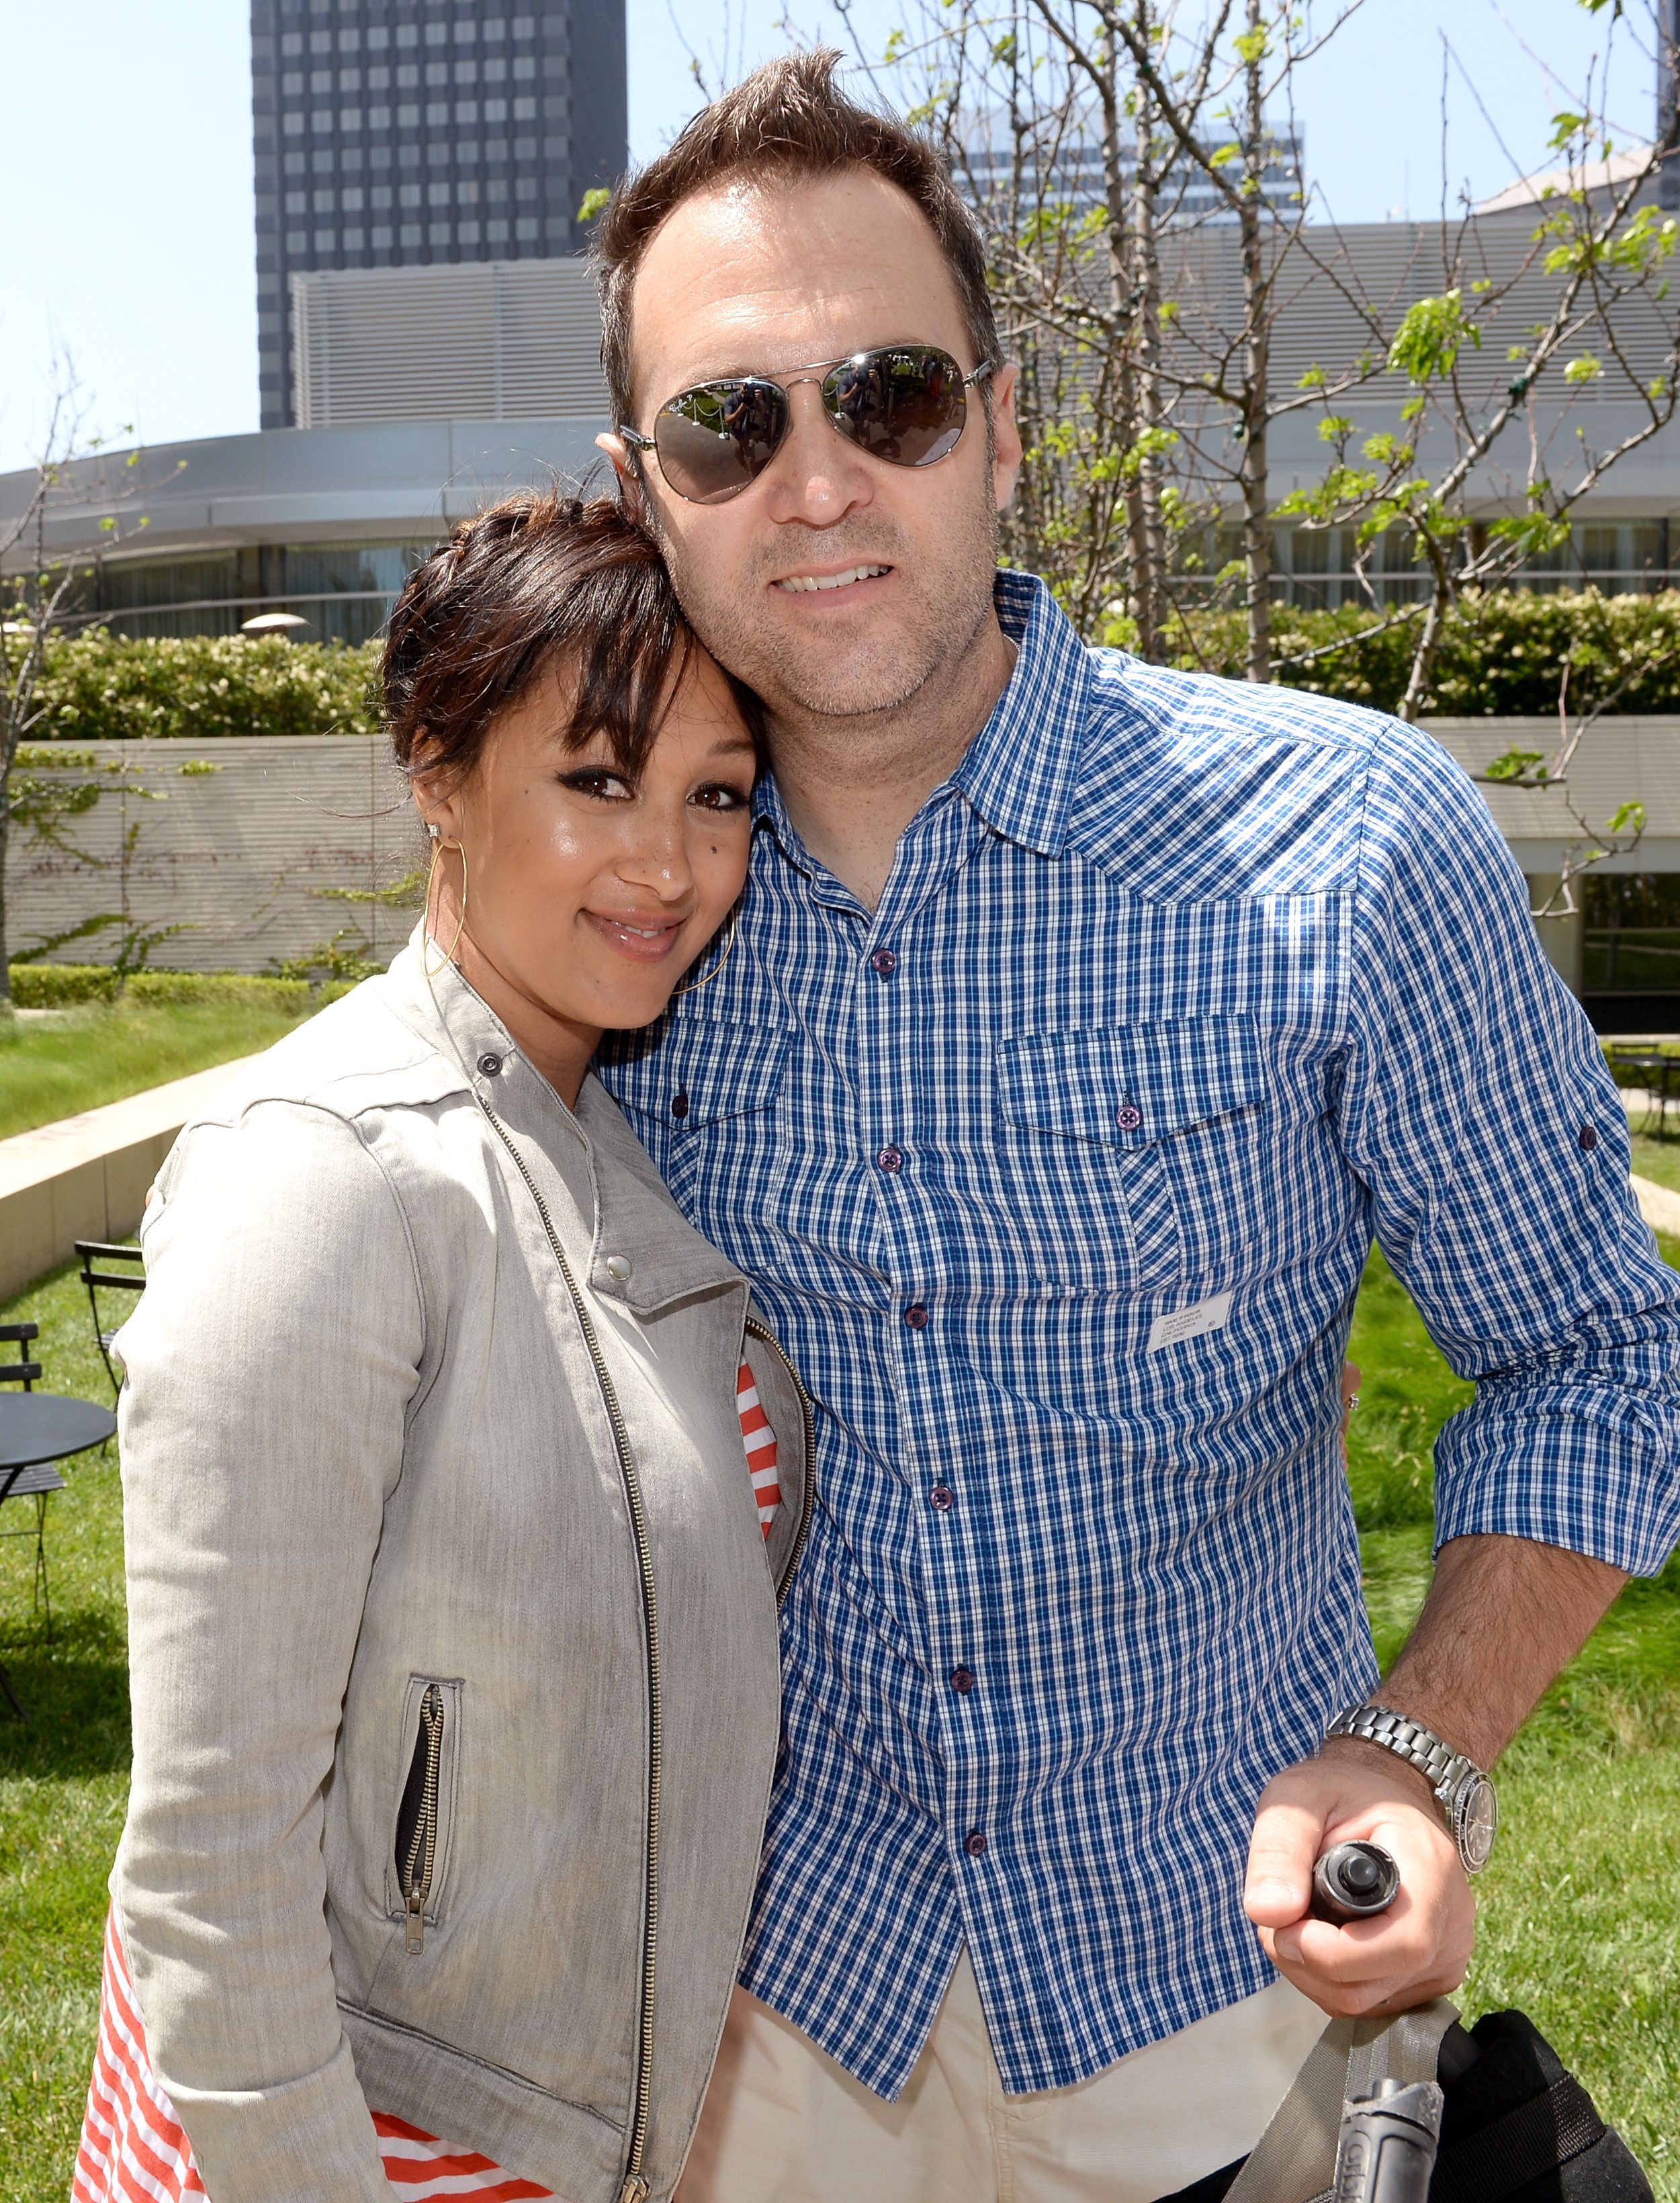 Adam Housley and wife Tamera Mowry at the Elizabeth Glaser Pediatric AIDS Foundation's 24th Annual "A Time For Heroes"  in 2013 in Los Angeles, California | Source: Getty Images